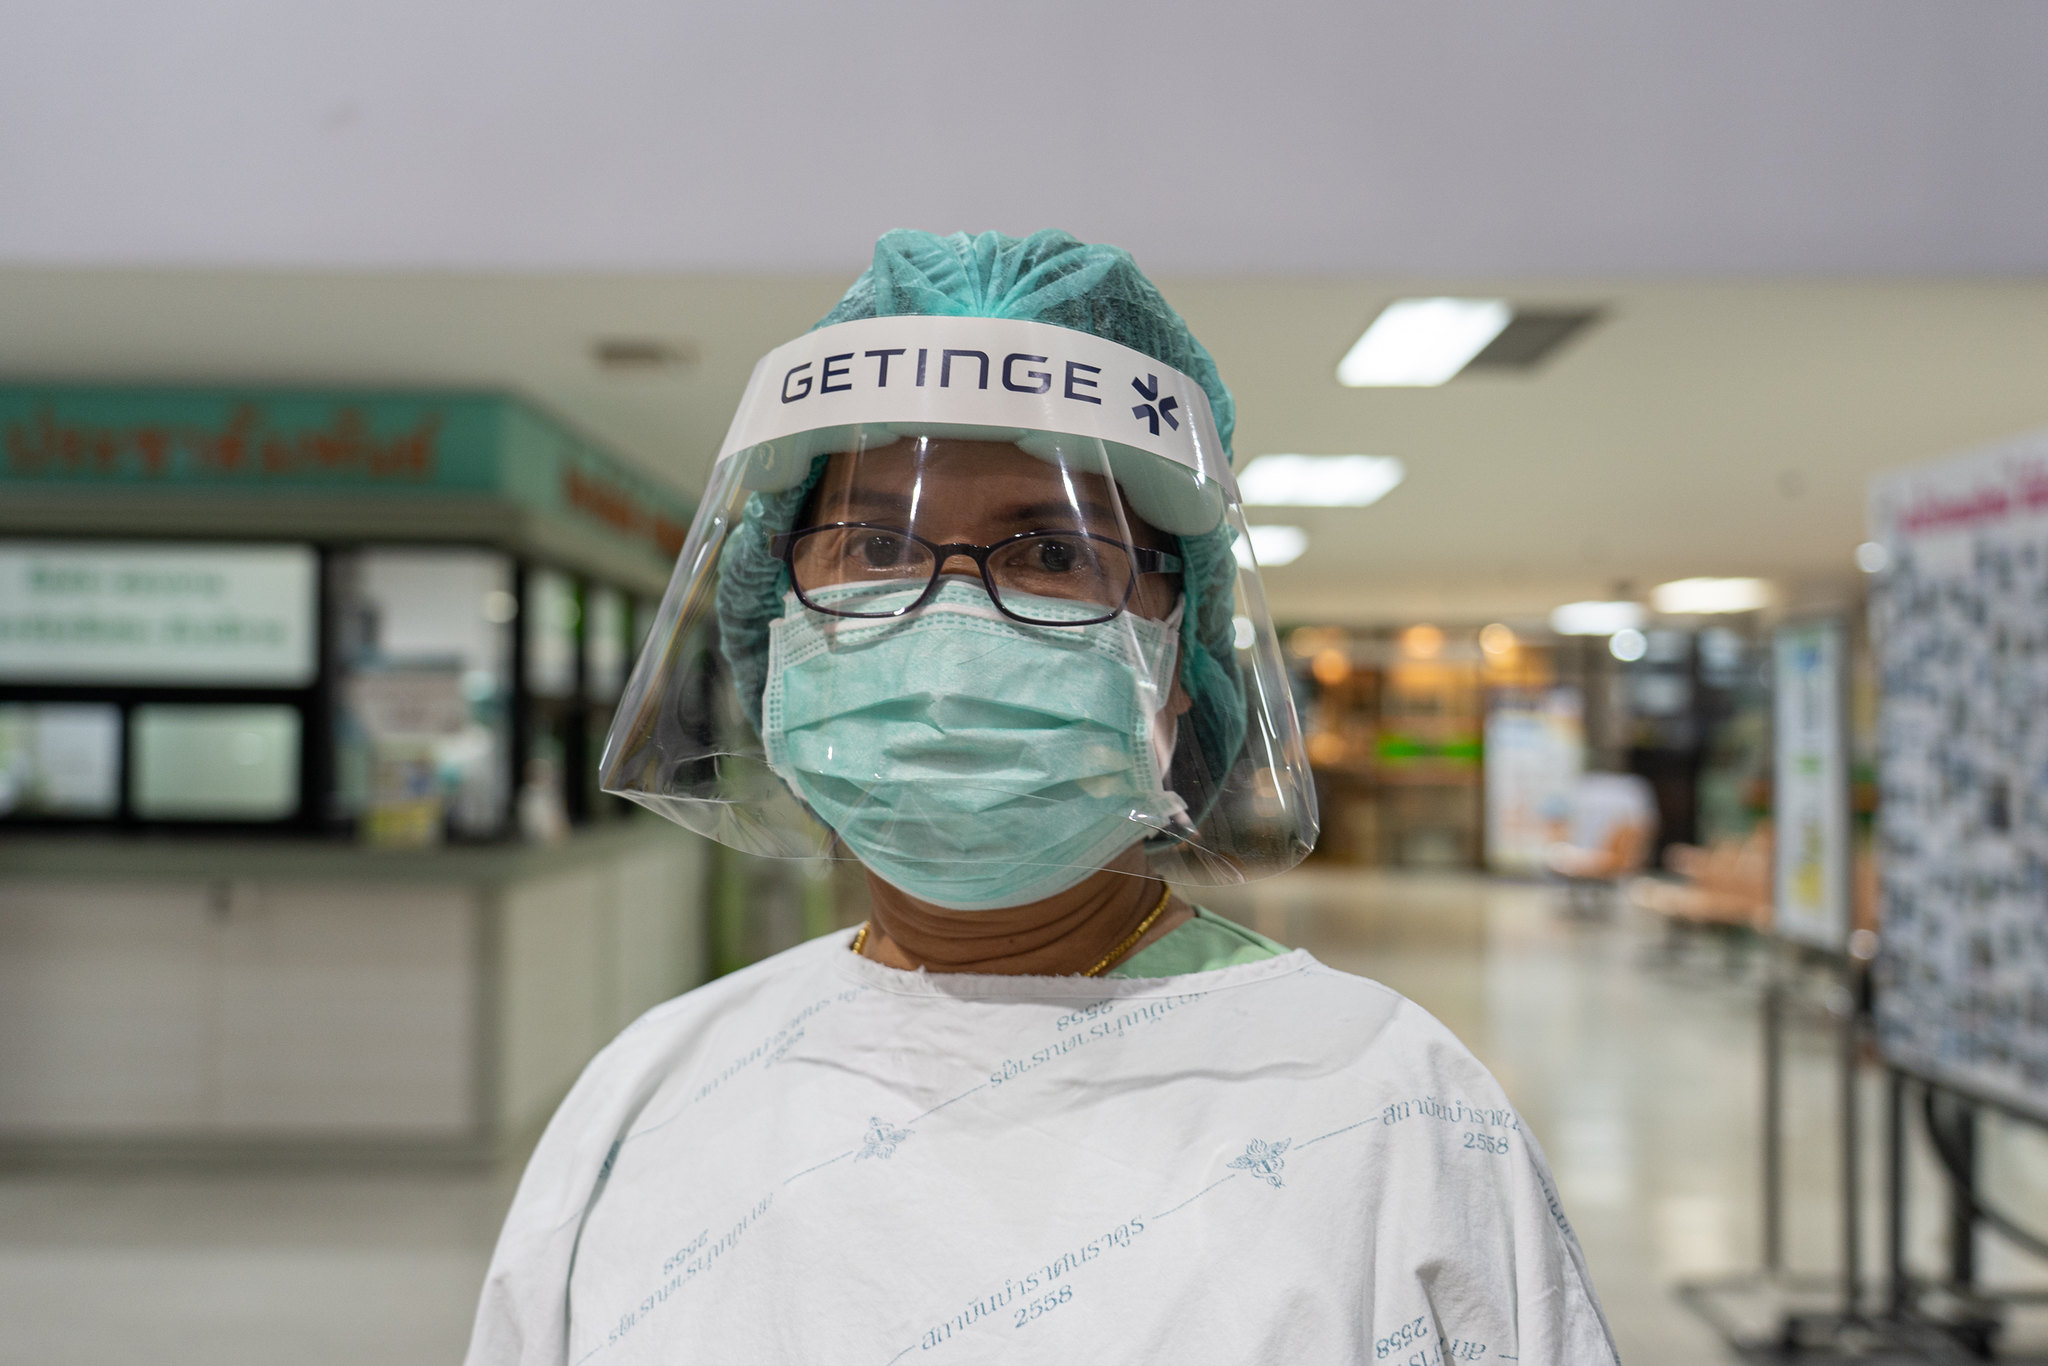 A nurse wearing face shield and mask during COVID-19 coronavirus pandemic in April 2020.